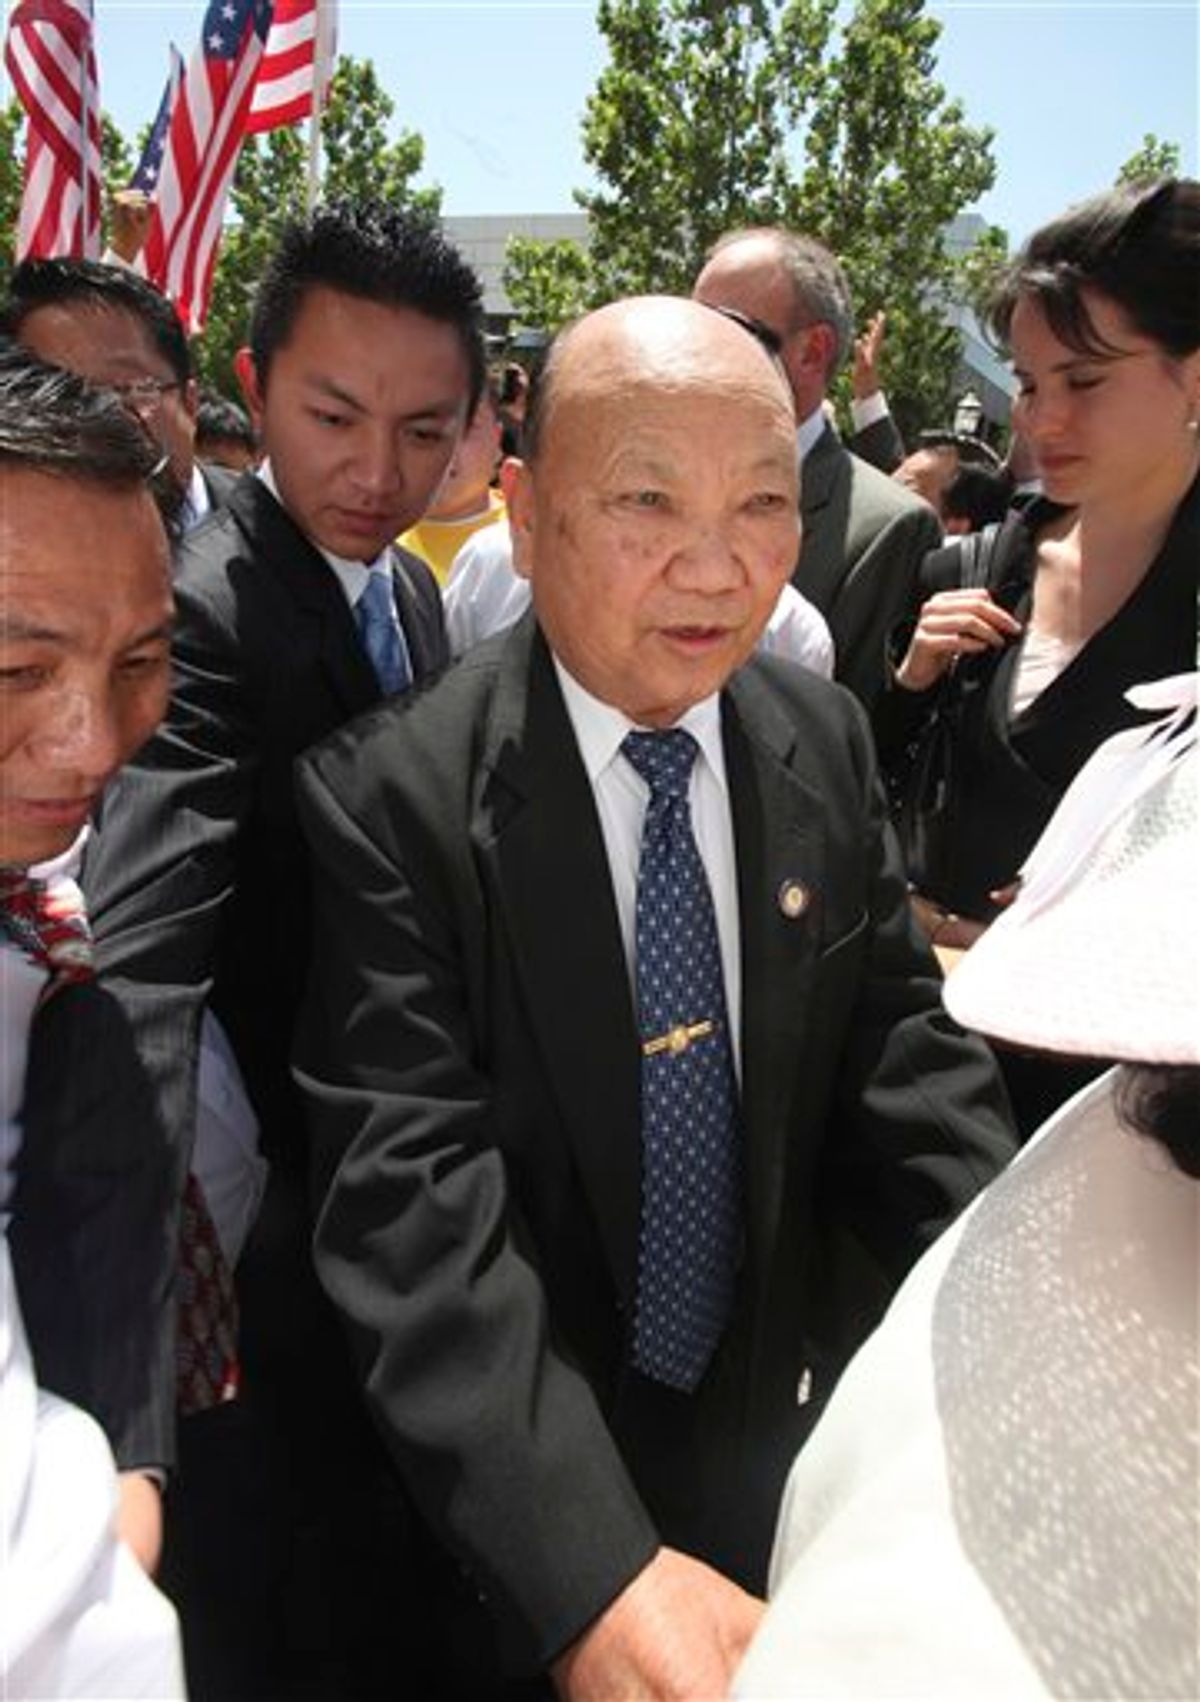 FILE - In this May 11, 2009 file photo, Former Laotian General Vang Pao, center, is escorted by supporters to the federal courthouse, in Sacramento, Calif.  Pao, a former general in the Royal Army of Laos who led thousands of Hmong mercenaries in a CIA backed secret army during the Vietnam War, has died. He was 81.  Pao died Thursday, Jan. 6, 2011, after being hospitalized for about 10 days, said Michelle Von Tersch, a spokeswoman for Clovis Community Medical Center. (AP Photo/Rich Pedroncelli, File)    (AP)